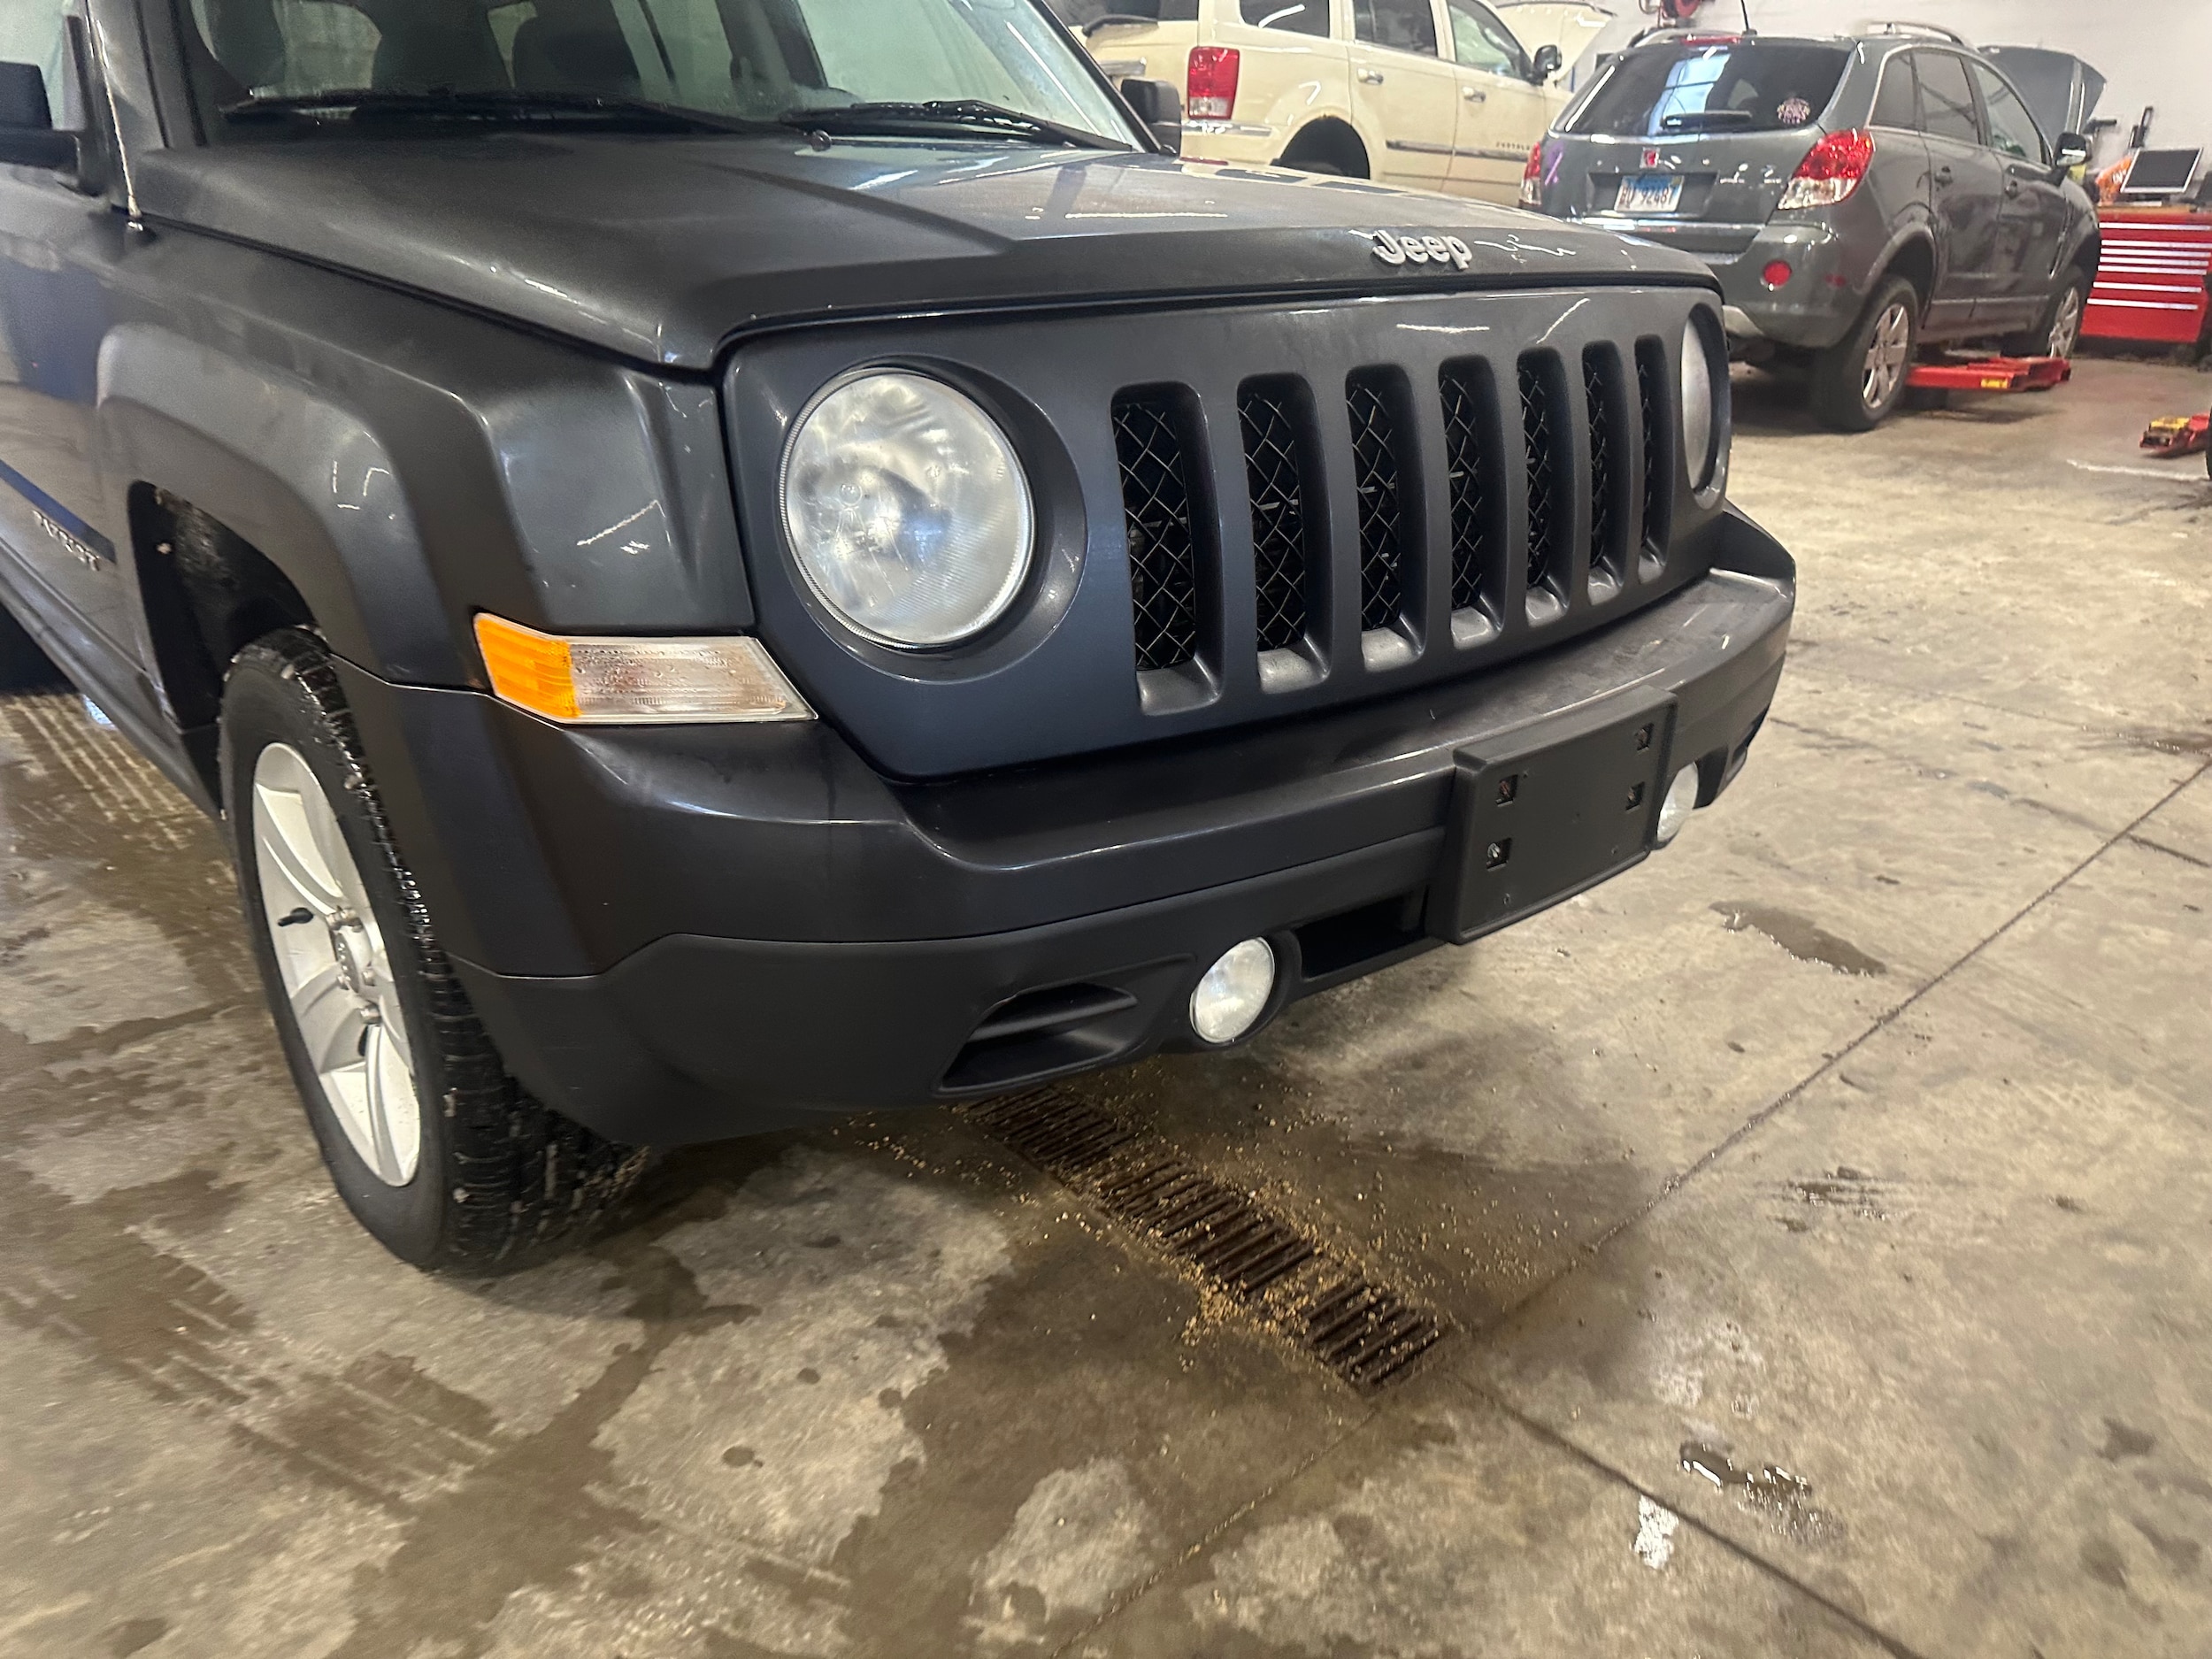 Used 2015 Jeep Patriot Latitude with VIN 1C4NJRFB8FD291297 for sale in Galena, IL